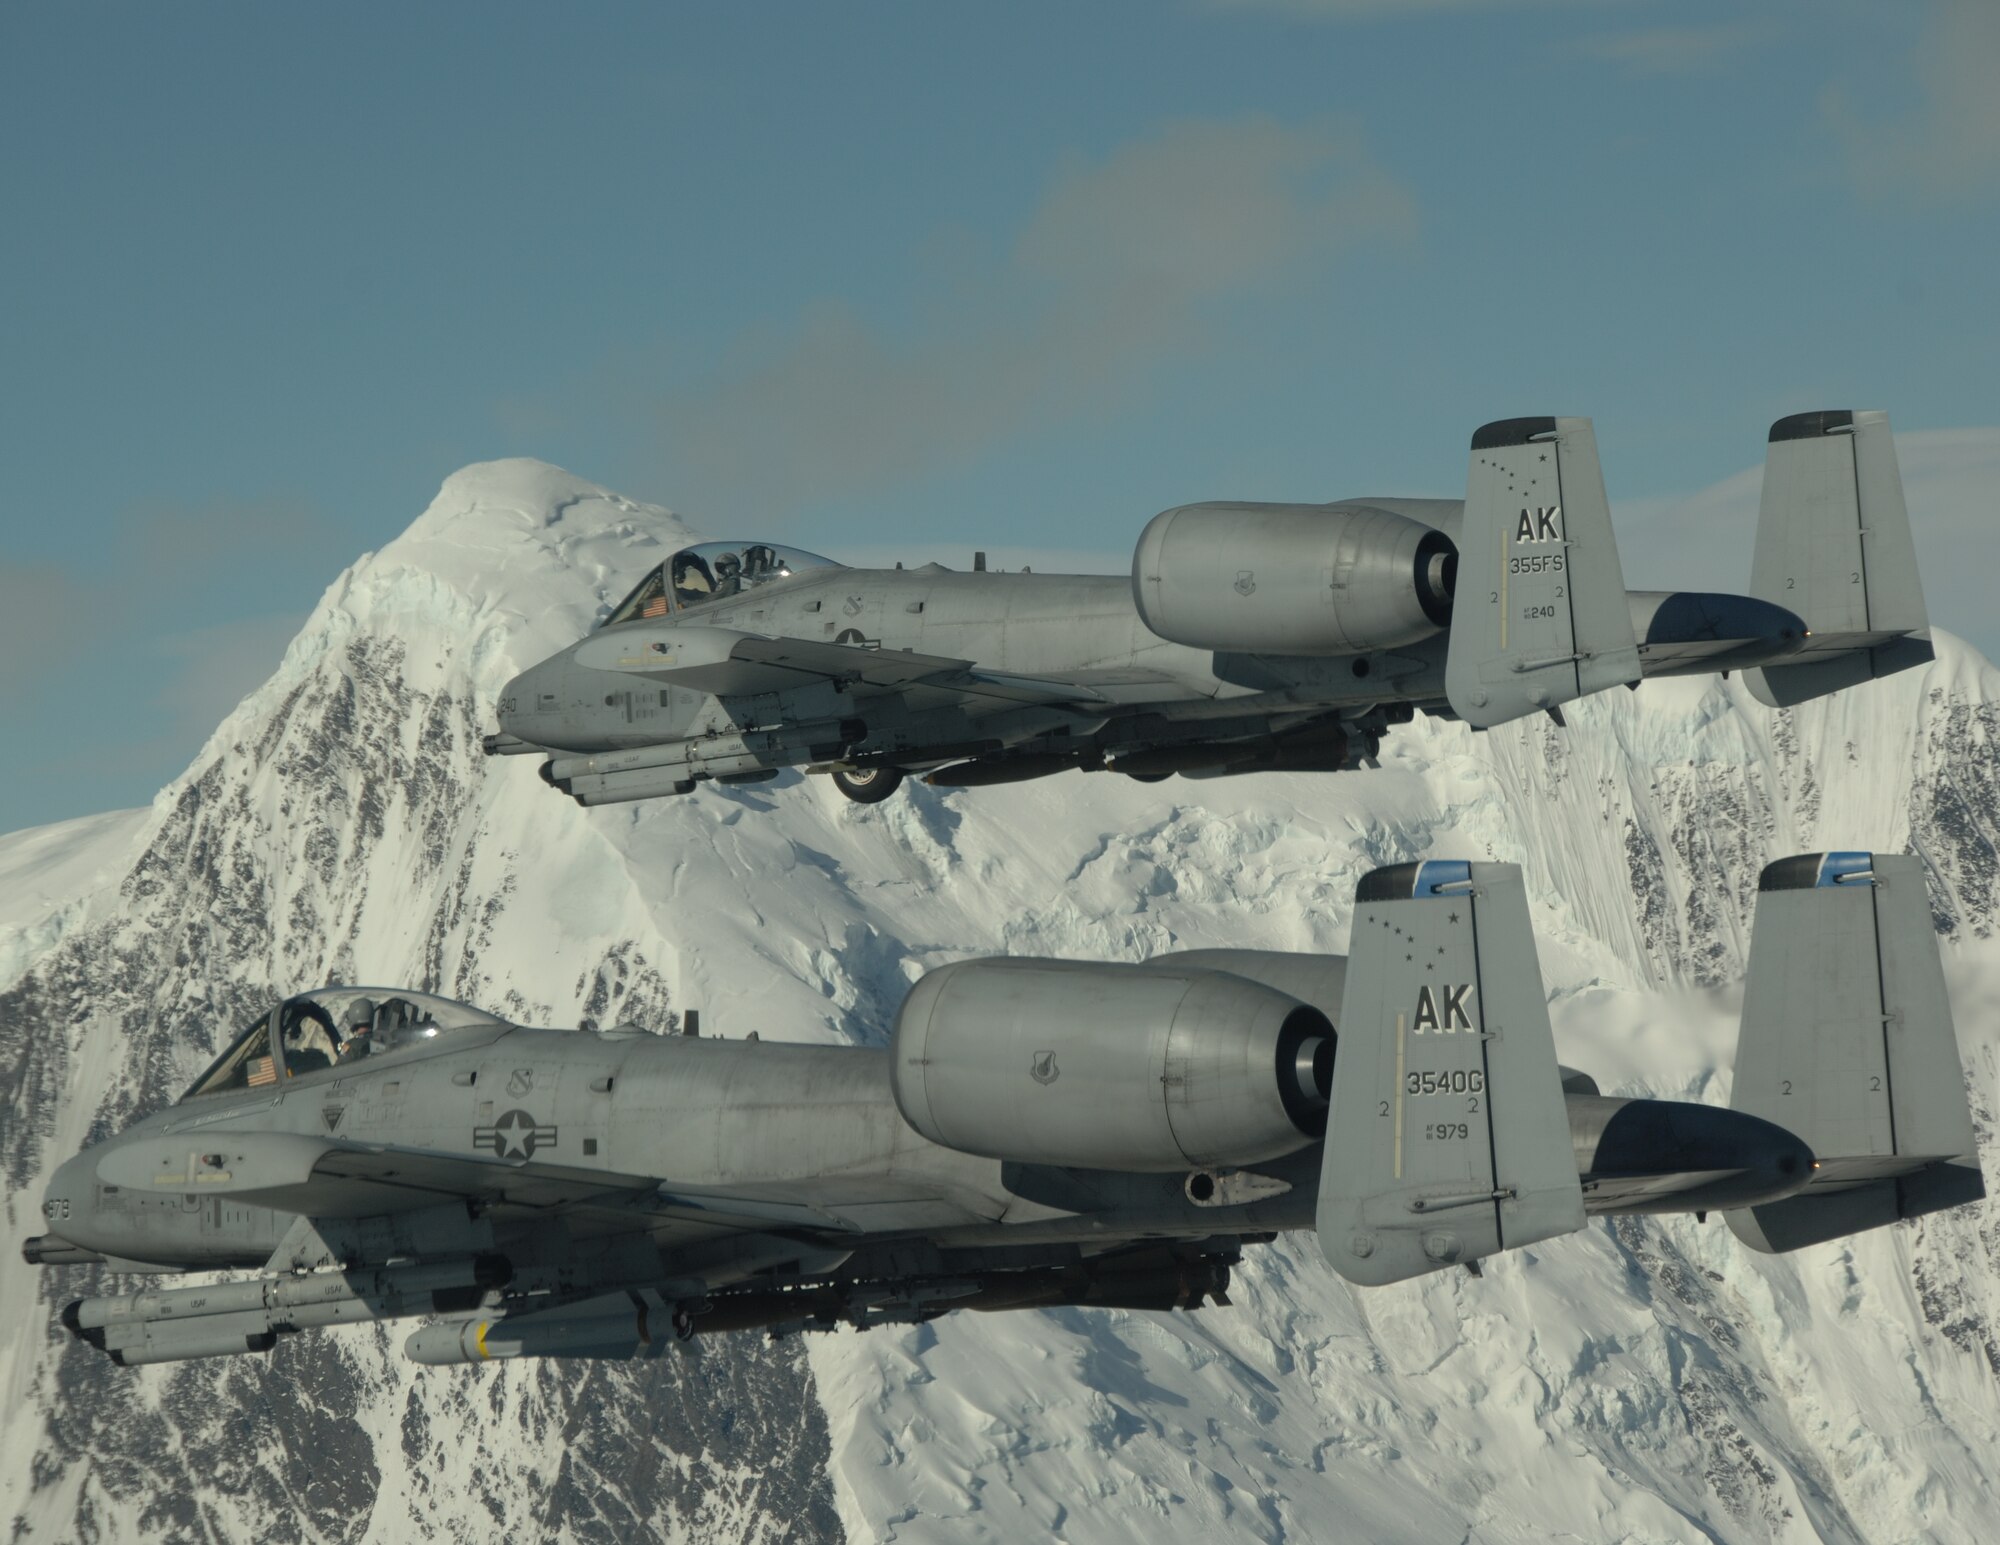 EIELSON AIR FORCE BASE, Alaska-- A/OA-10 Warthog's from the 355th Fighter Squadron fly over the Pacific Alaska Range Complex during live fire training.The 355th Fighter Squadron is tasked to provide mission ready A/OA-10s as well as search and rescue capability, in Alaska and deployed sites worldwide. (U.S. Air Force photo by Master Sgt. Robert Wieland) 